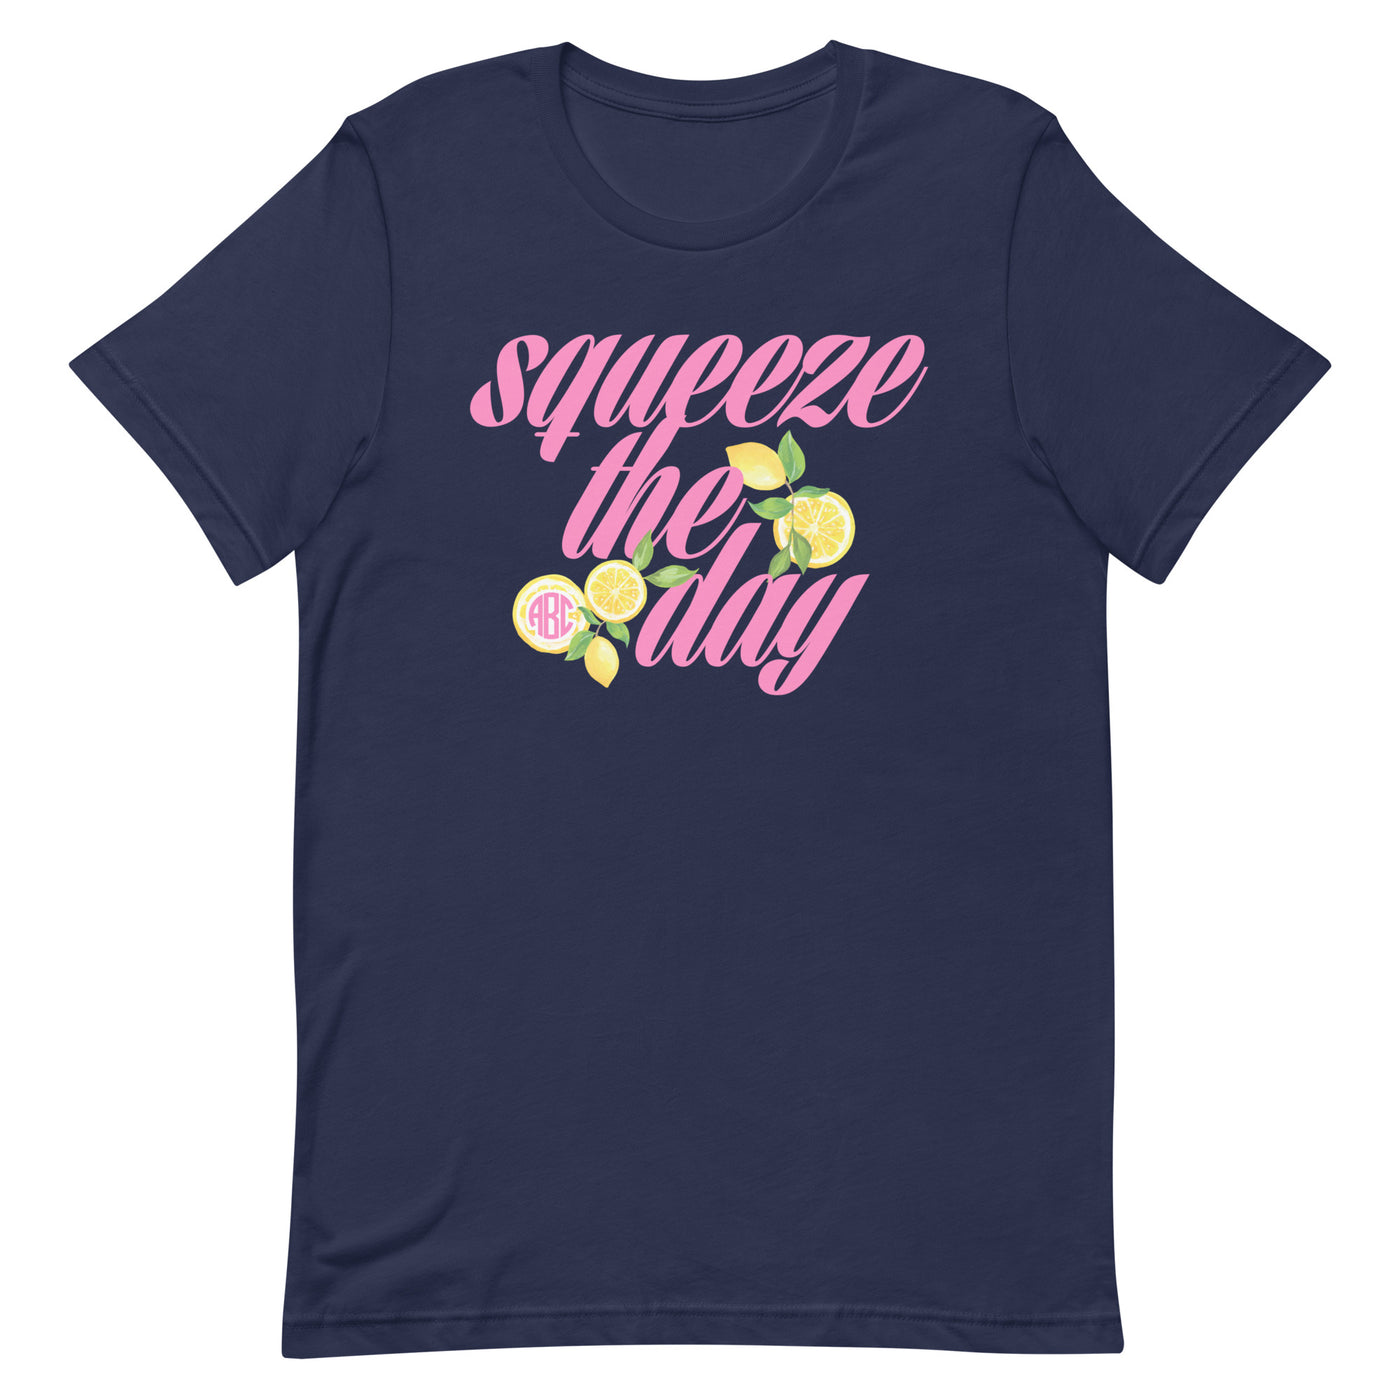 Monogrammed 'Squeeze The Day' Premium T-Shirt